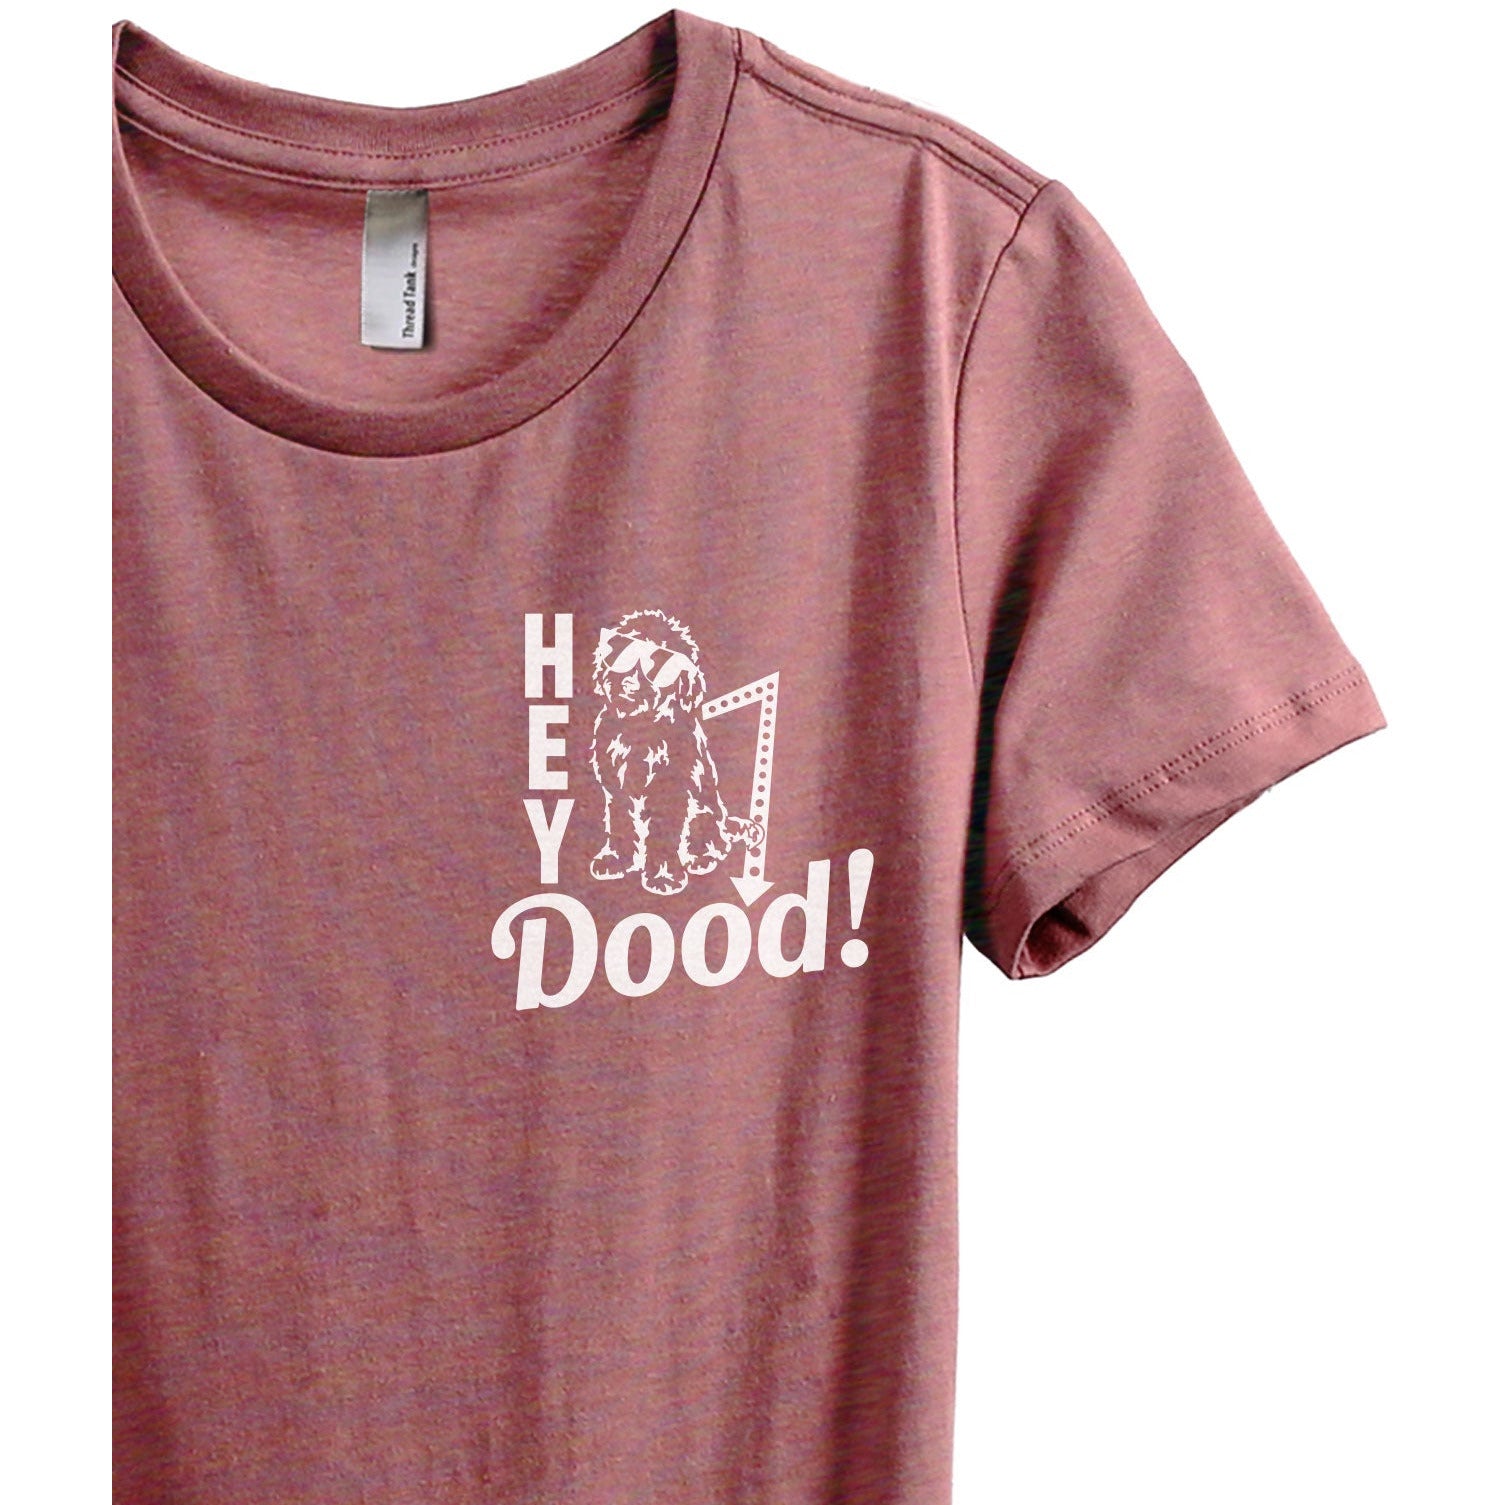 Hey Doodle Dog Women's Relaxed Crewneck T-Shirt Top Tee Heather Rouge Zoom Details
